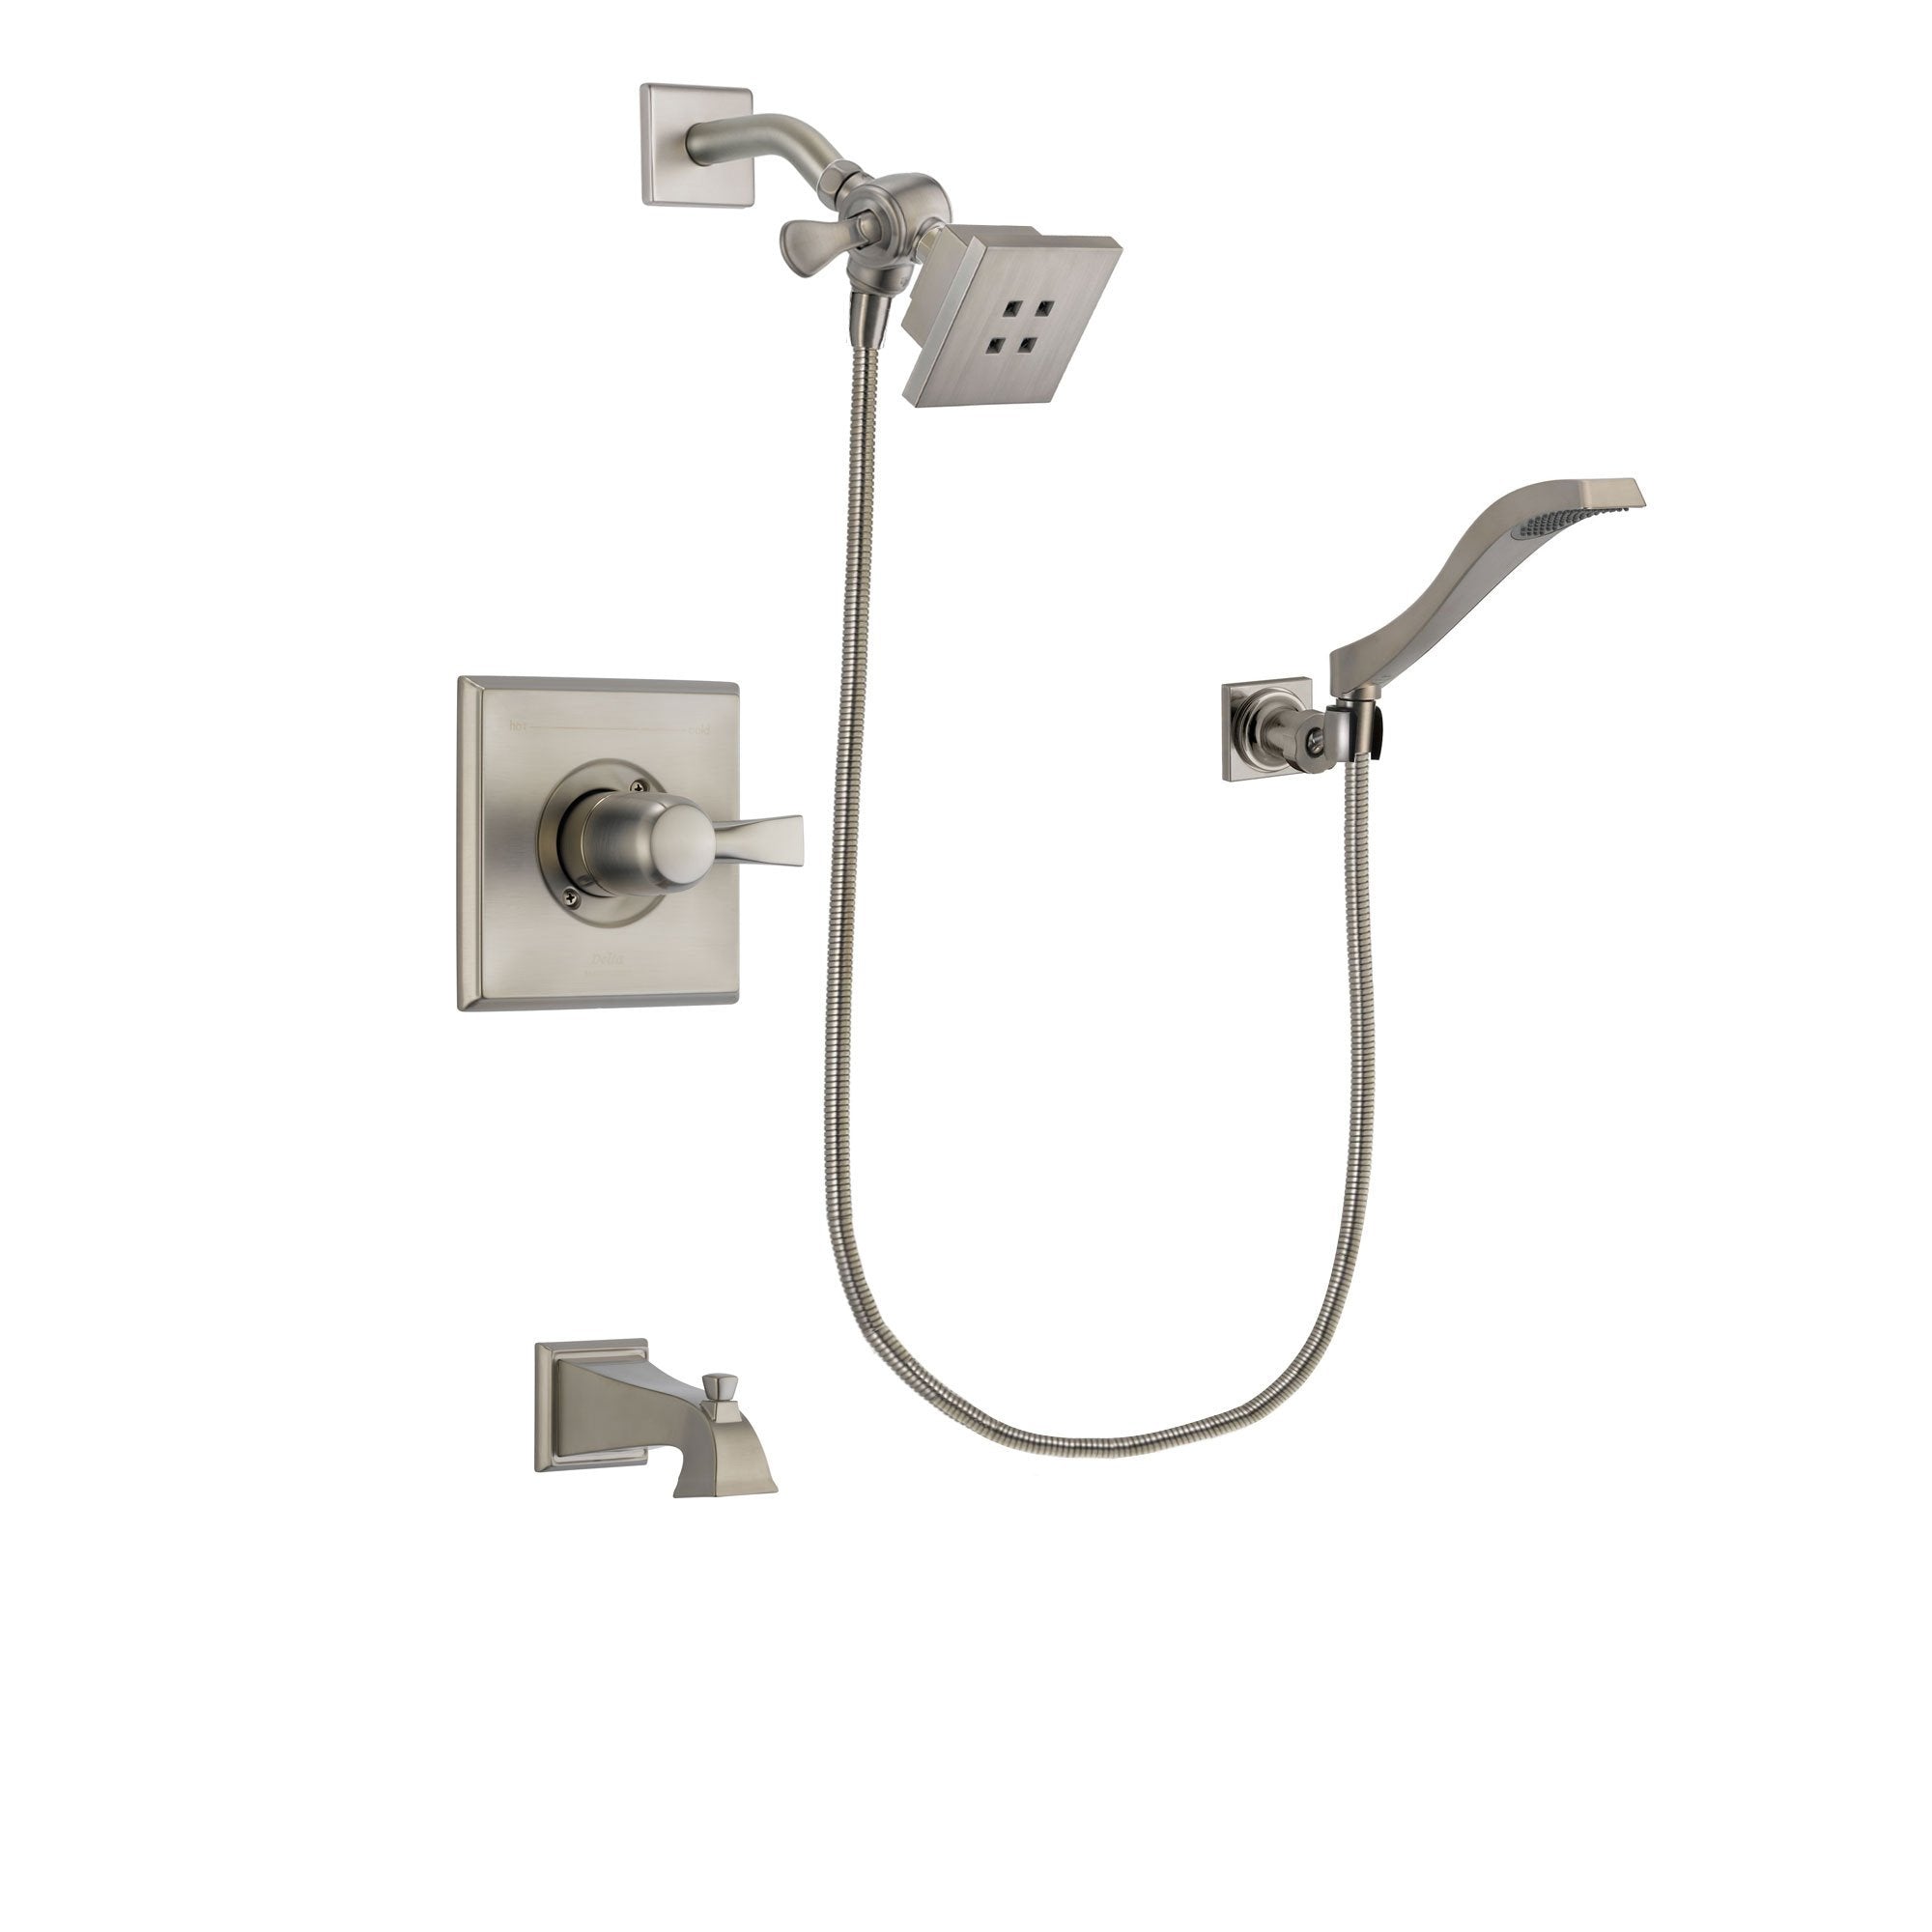 Delta Dryden Stainless Steel Finish Tub and Shower Faucet System Package with Square Showerhead and Modern Wall Mount Handheld Shower Spray Includes Rough-in Valve and Tub Spout DSP2063V